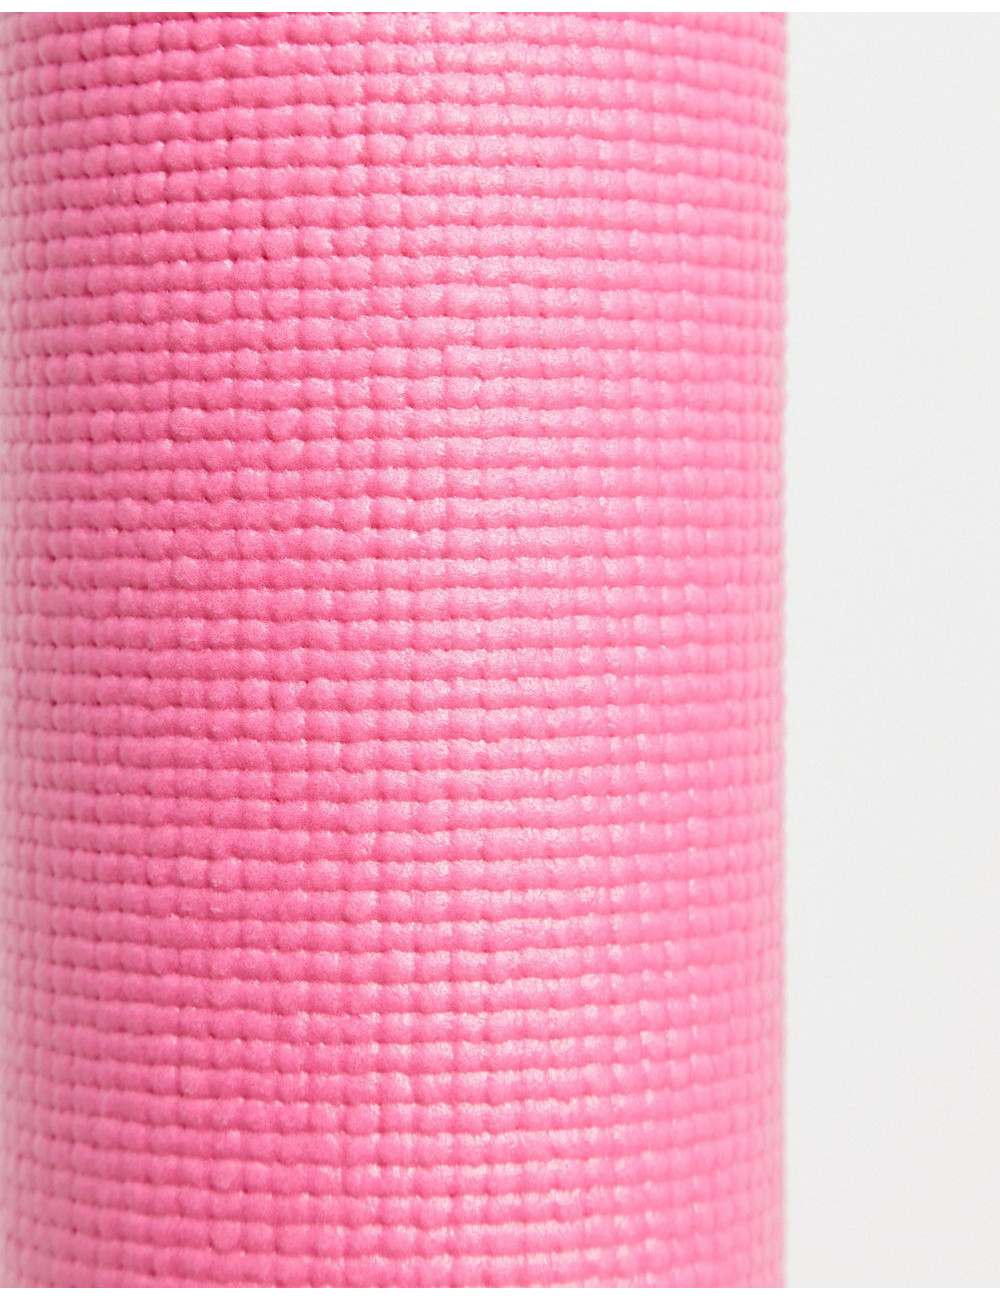 FitHut yoga mat in pink